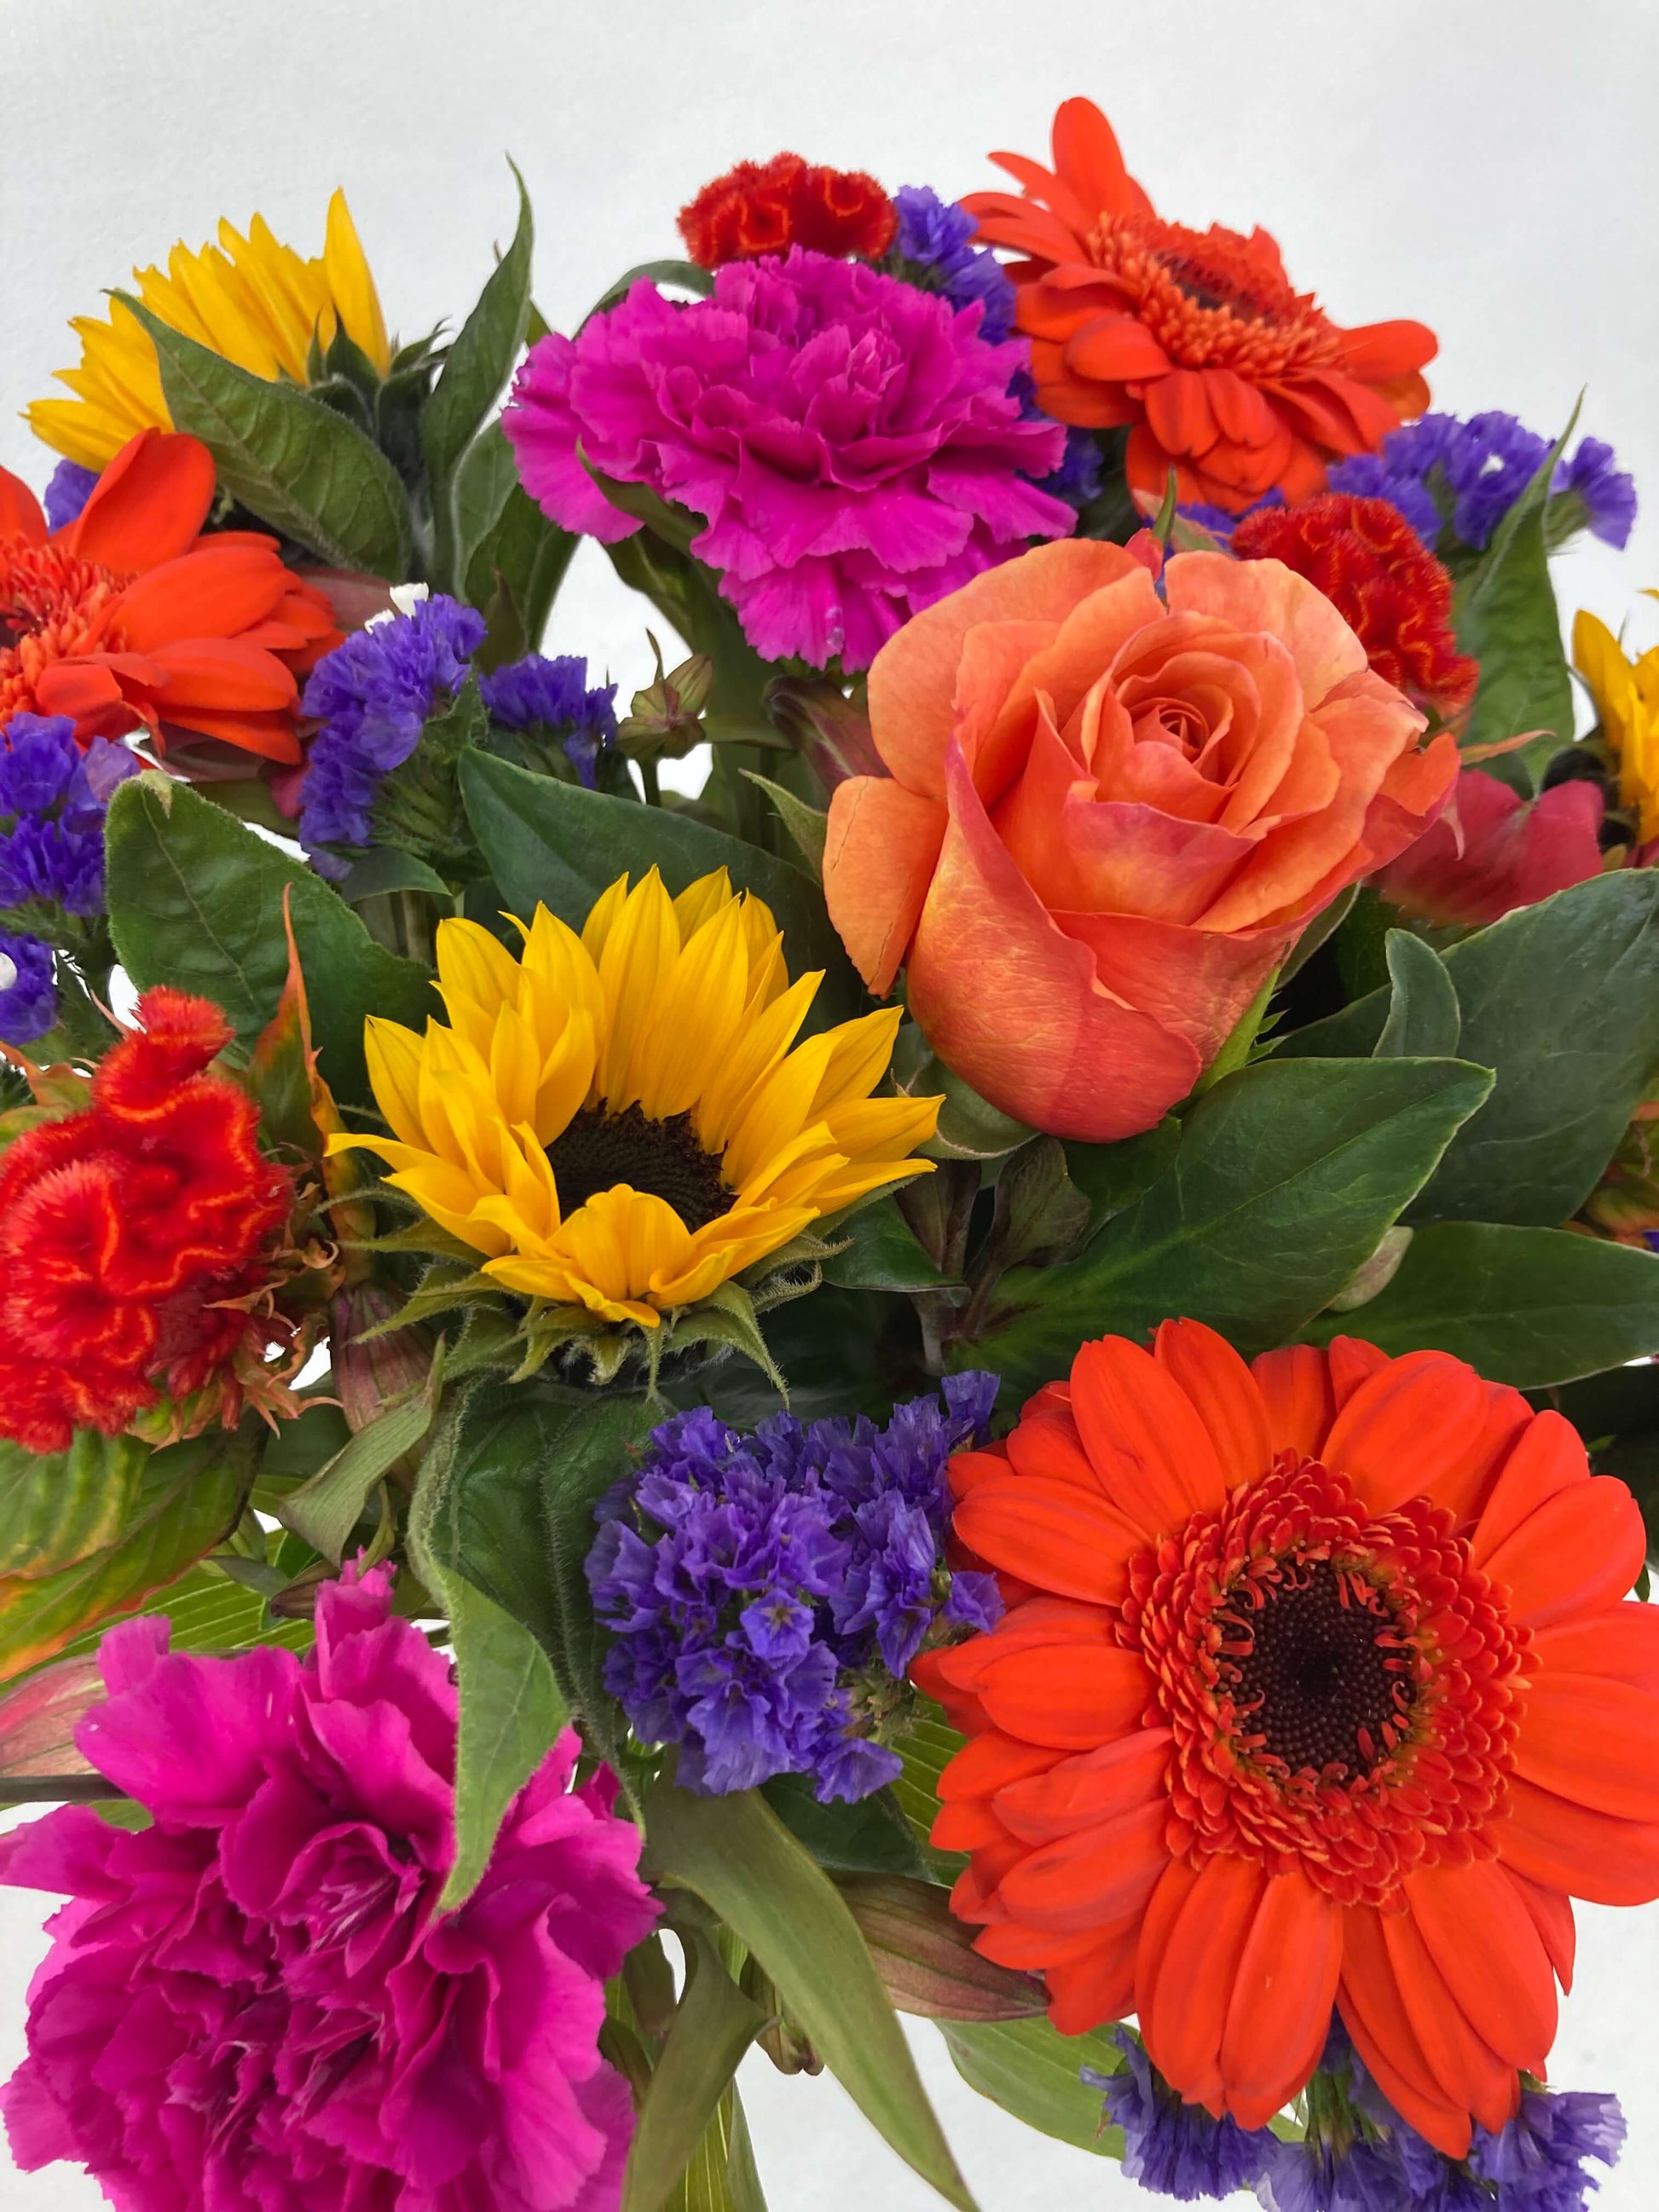 Bright posy consisting of orange, yellow, red, purple, and green flowers up close